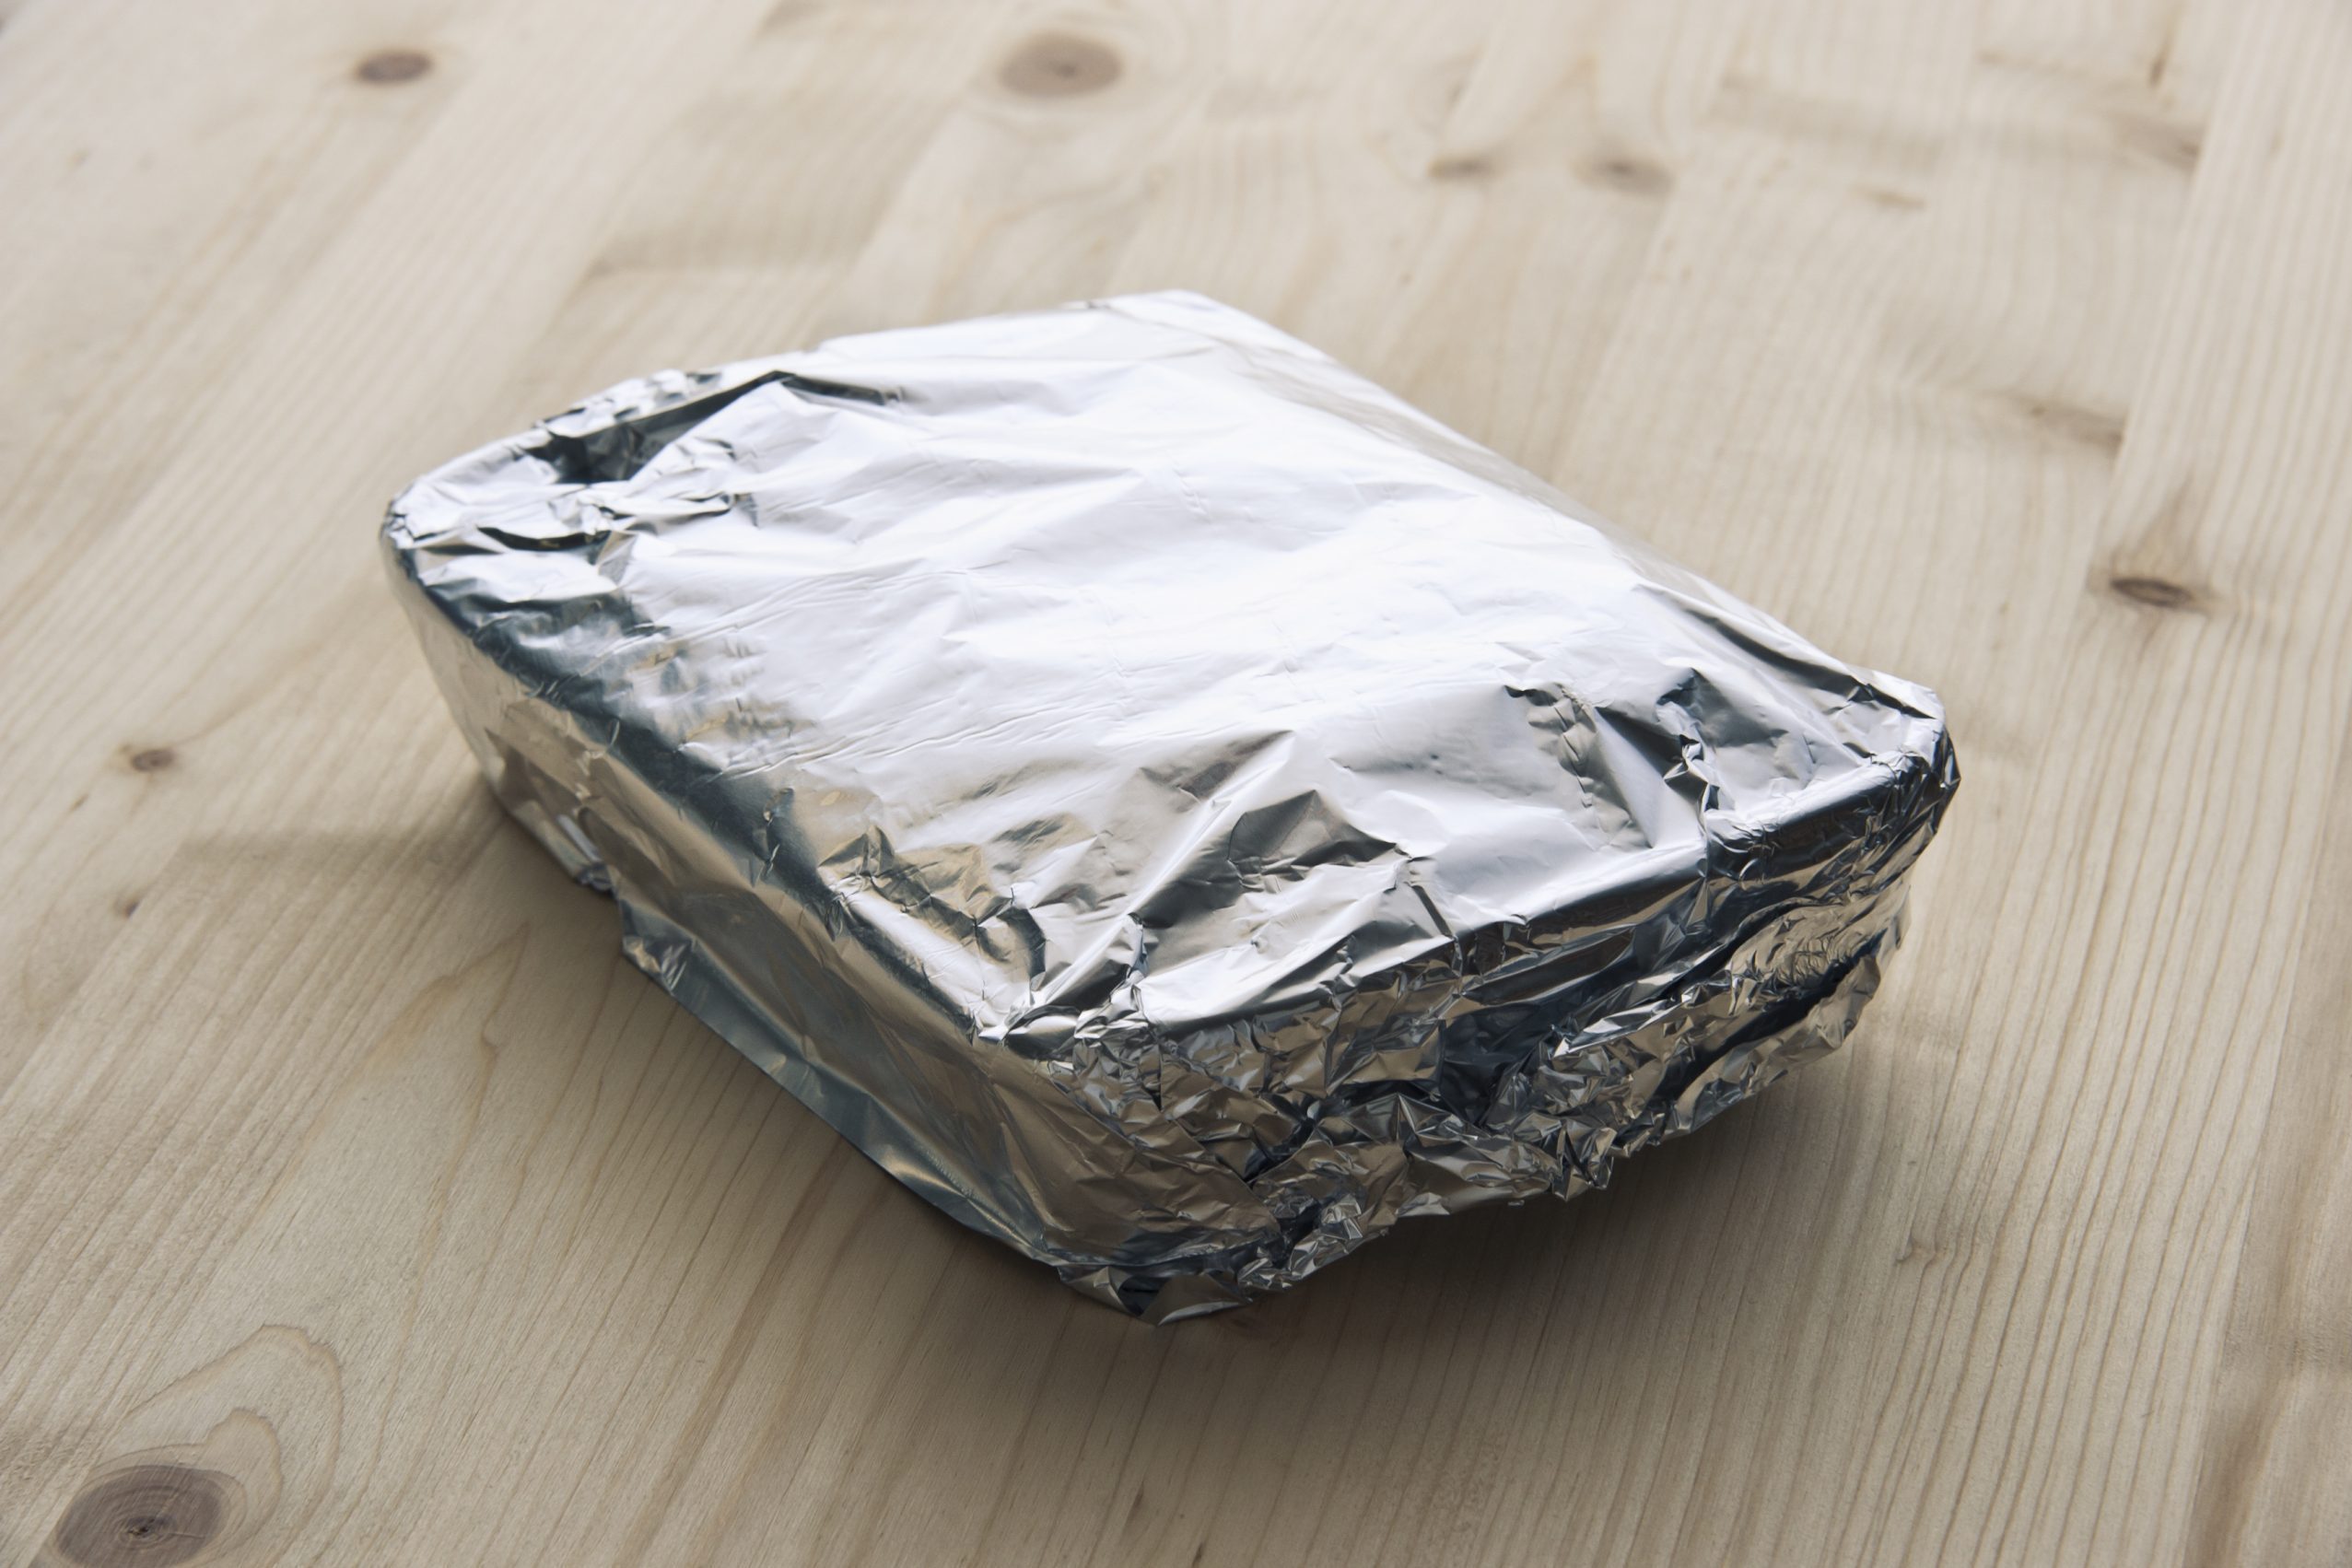 Aluminum foil tray for food packaging and storaging